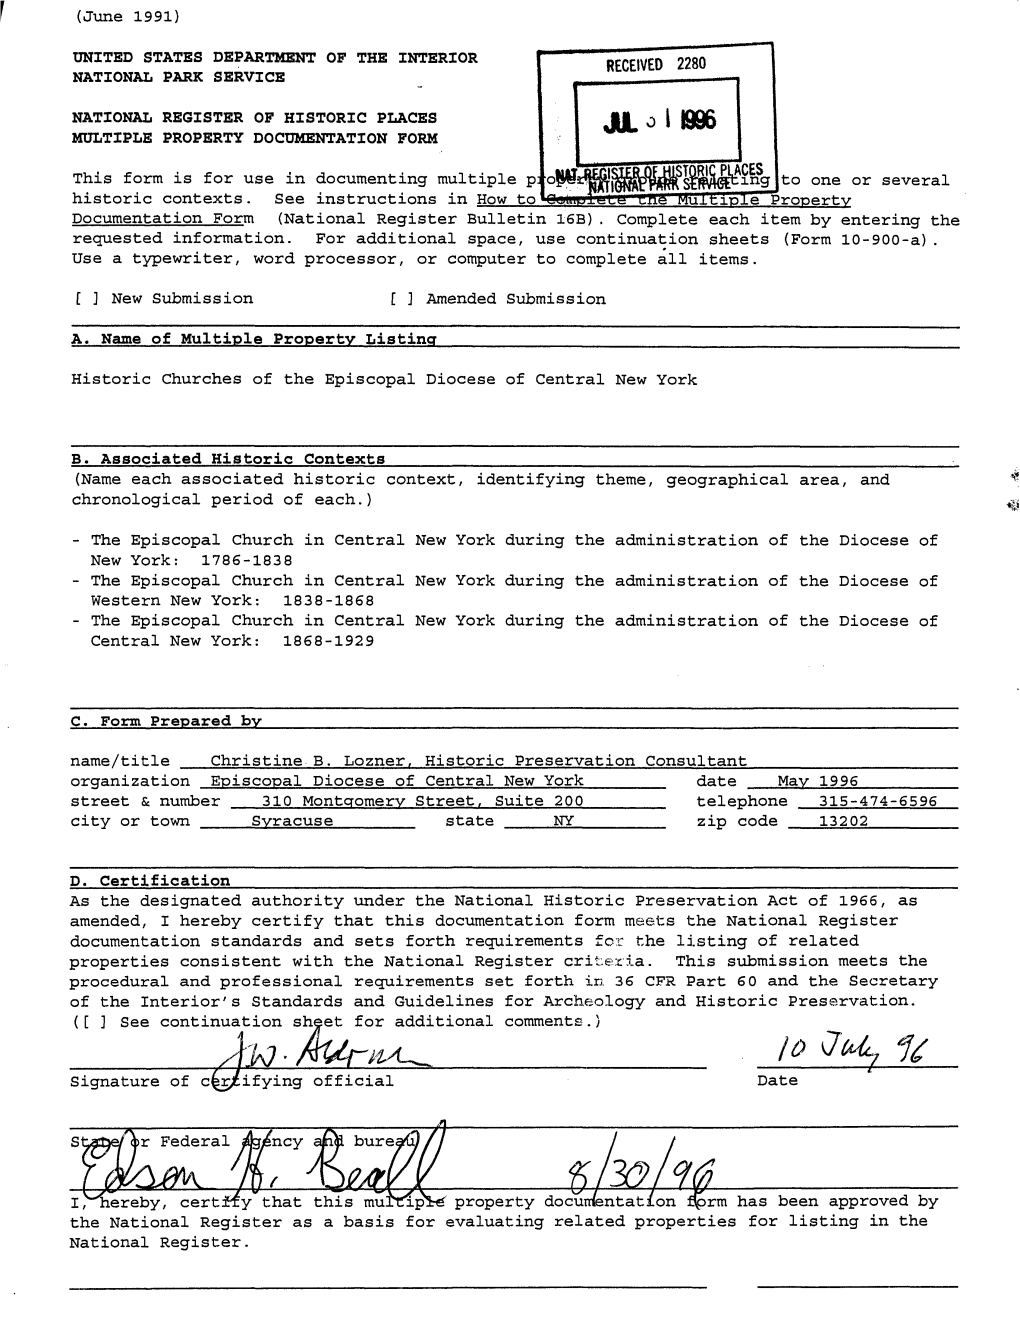 Julol 1996 MULTIPLE PROPERTY DOCUMENTATION FORM This Form Is for Use in Documenting Multiple P: ^Sftlwwpwt 1 to One Or Several Historic Contexts